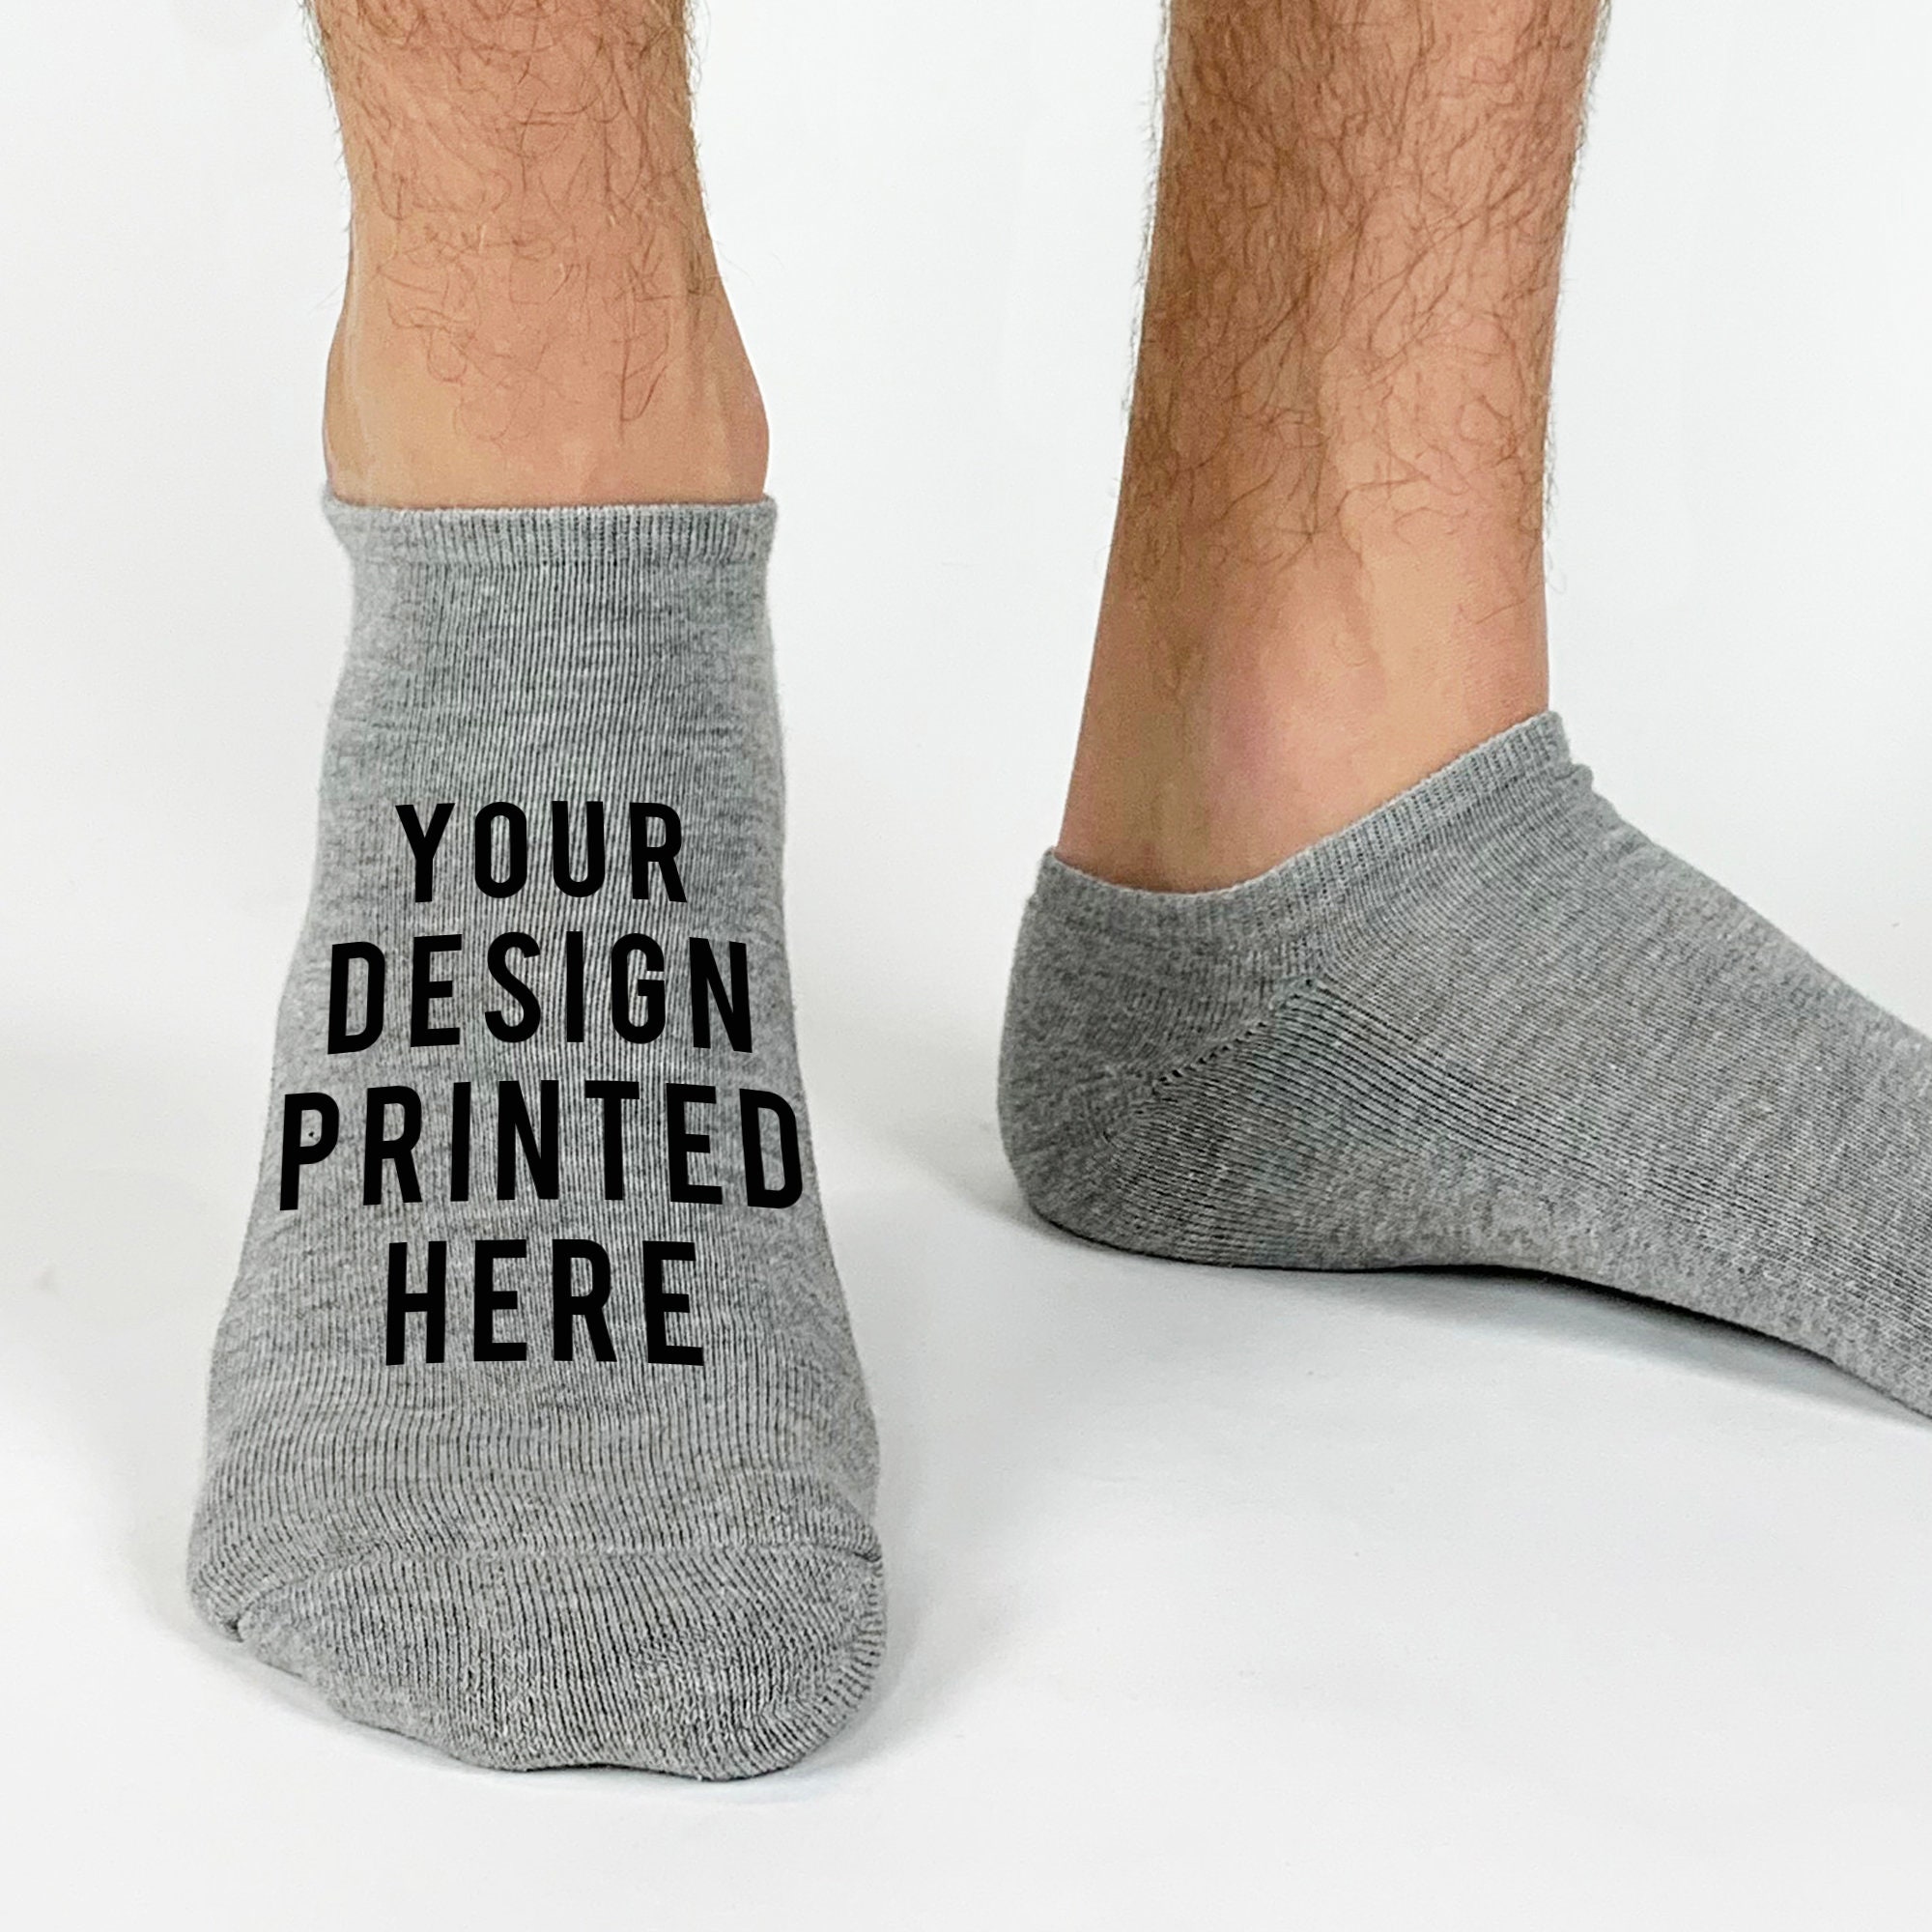 Custom and Personalized No Show Socks for Men, Cool Socks to Add